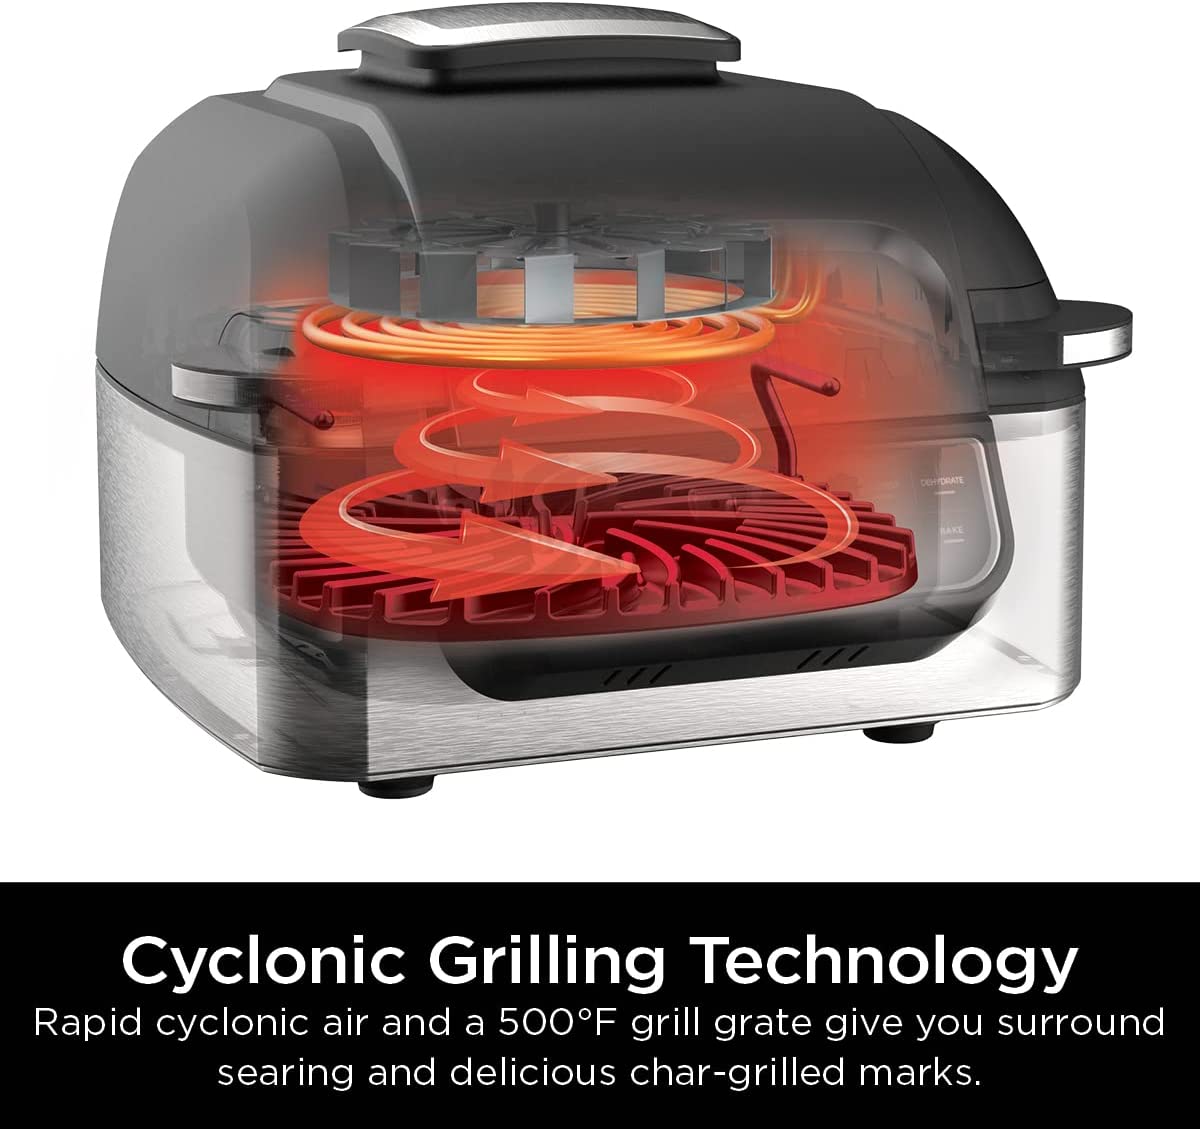 https://kitchenteller.com/wp-content/uploads/2022/10/Cyclonic-grilling-technology-Ninja-Foodi-5-in-1-Indoor-Grill-with-Air-Fryer-Review.jpg